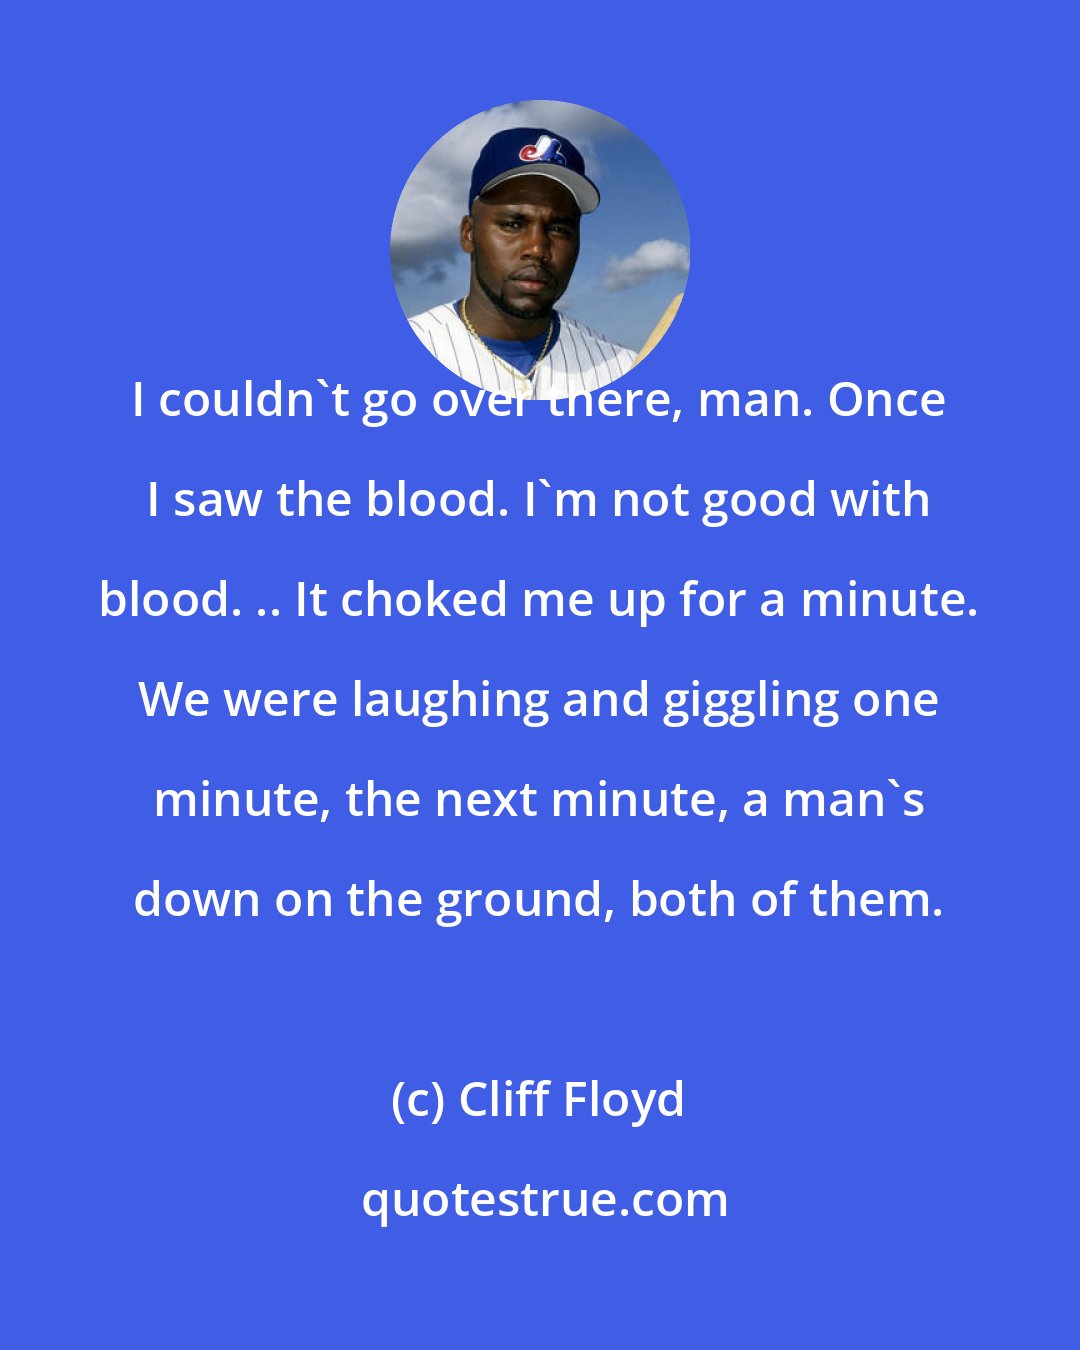 Cliff Floyd: I couldn't go over there, man. Once I saw the blood. I'm not good with blood. .. It choked me up for a minute. We were laughing and giggling one minute, the next minute, a man's down on the ground, both of them.